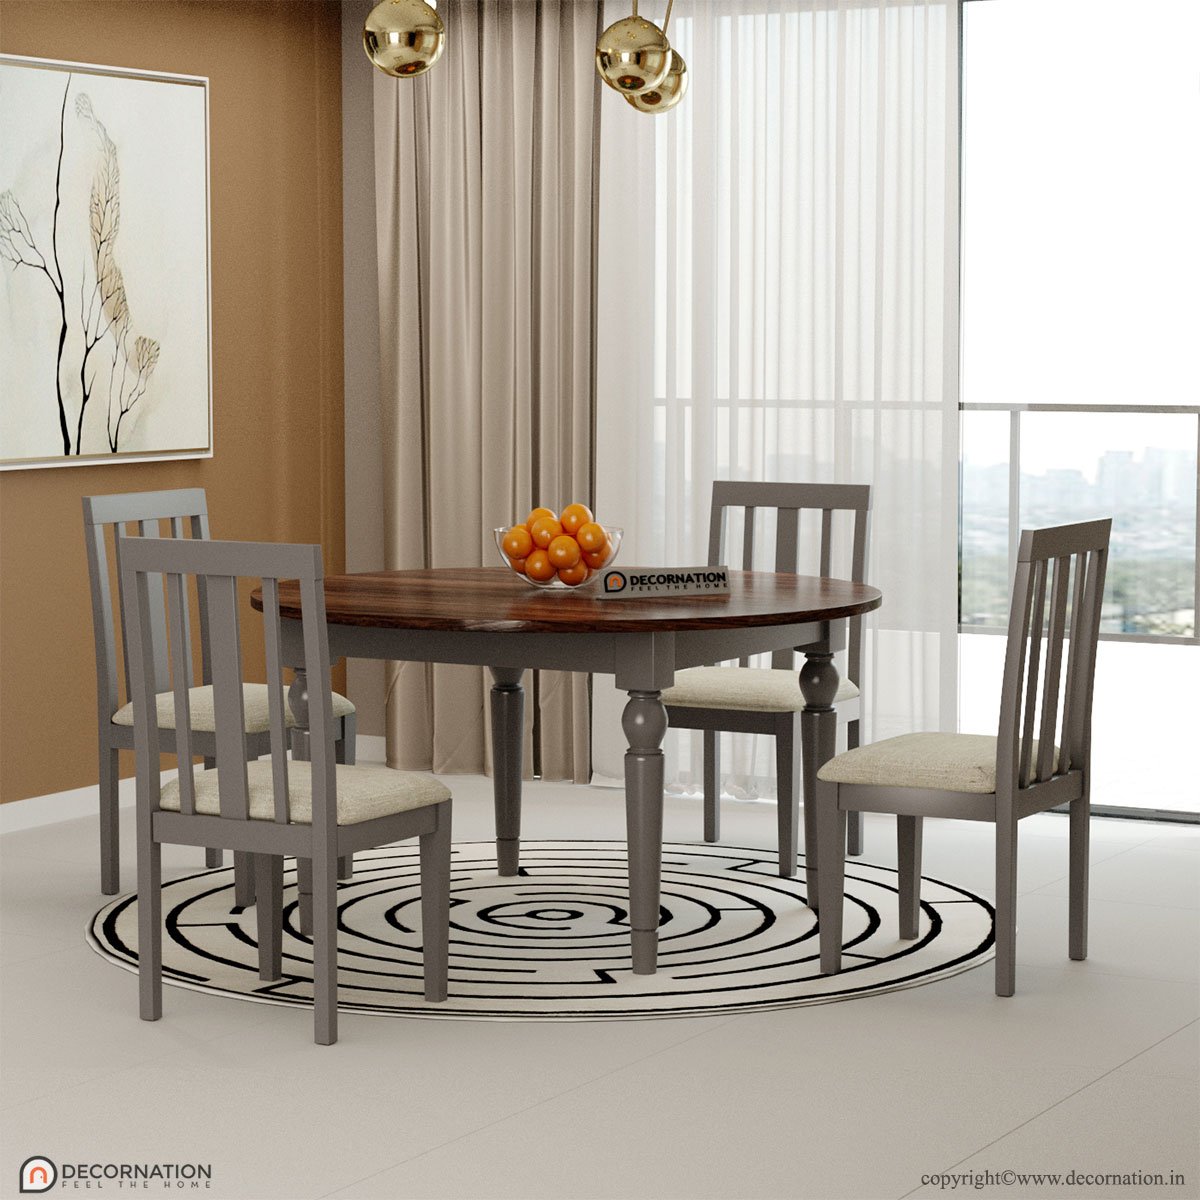 Sierra Dining Table Set for 4 with Chairs